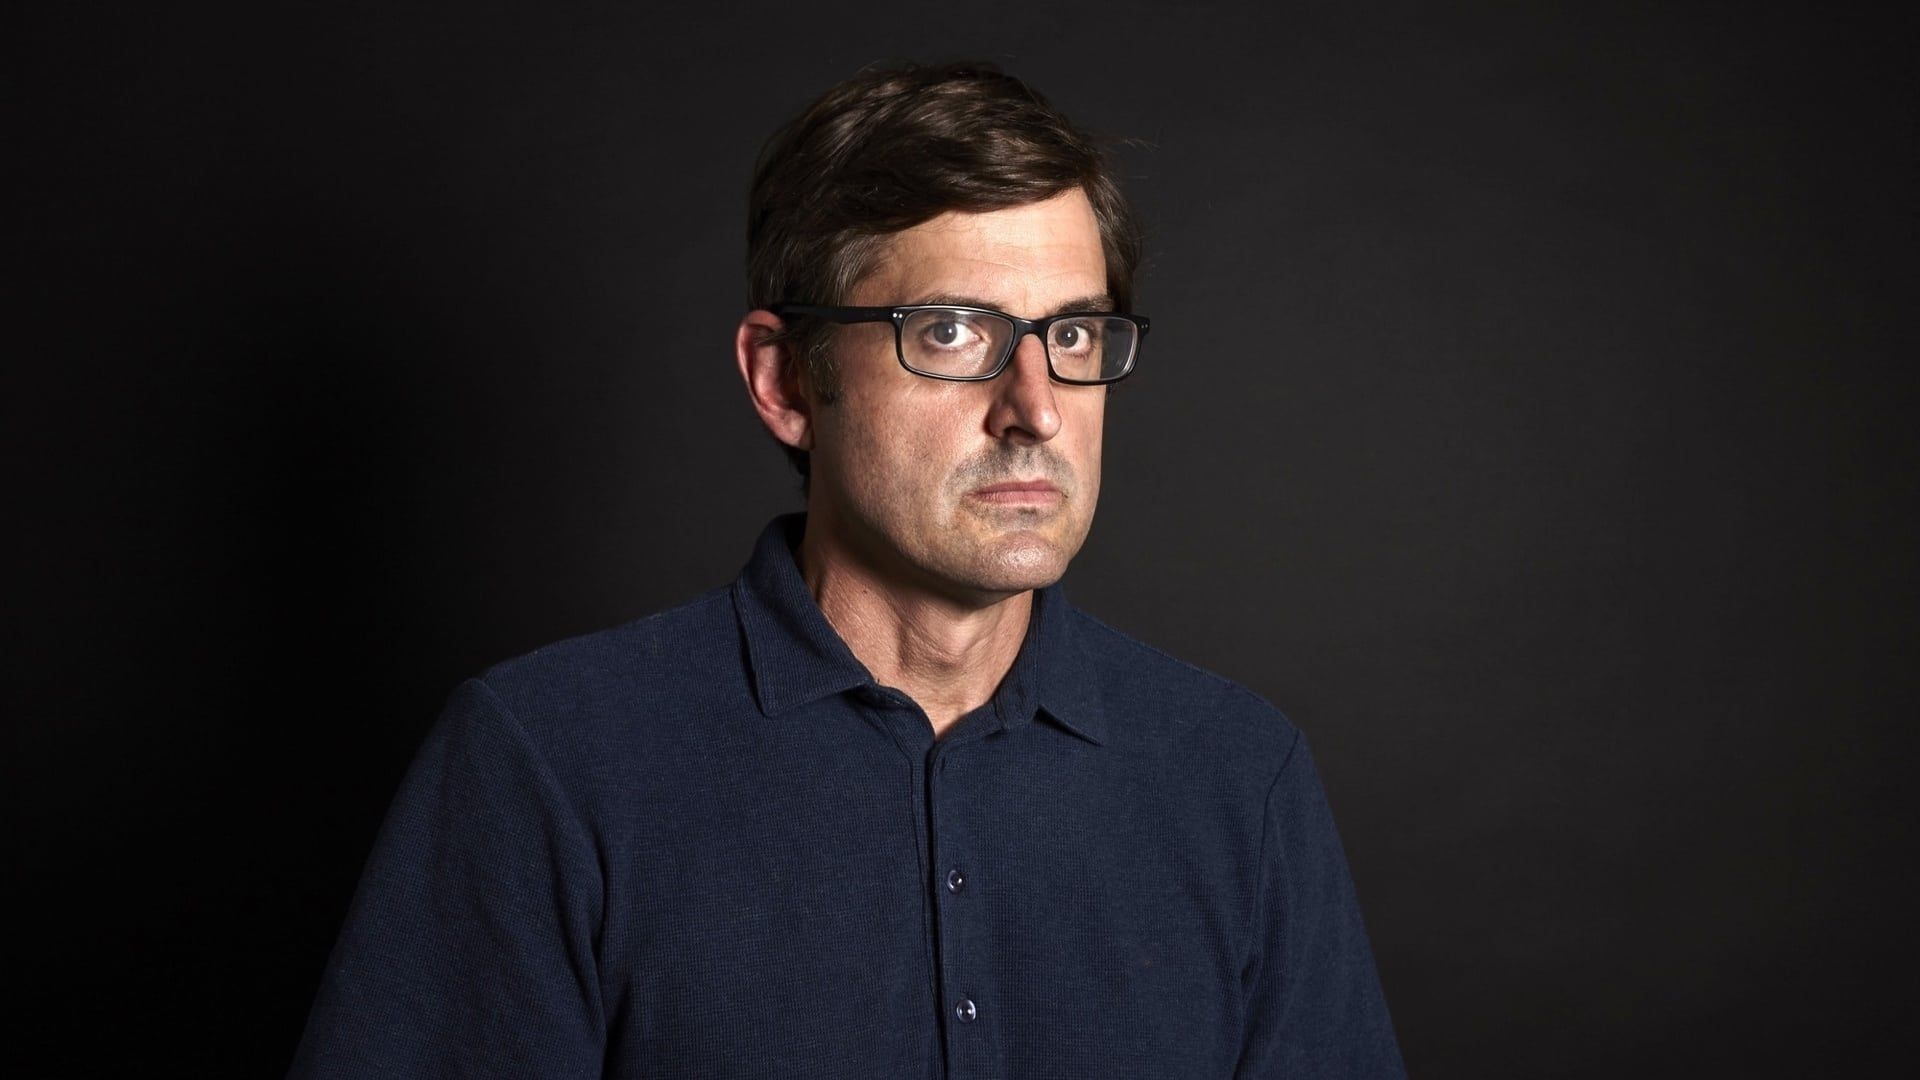 Louis Theroux: Under the Knife background